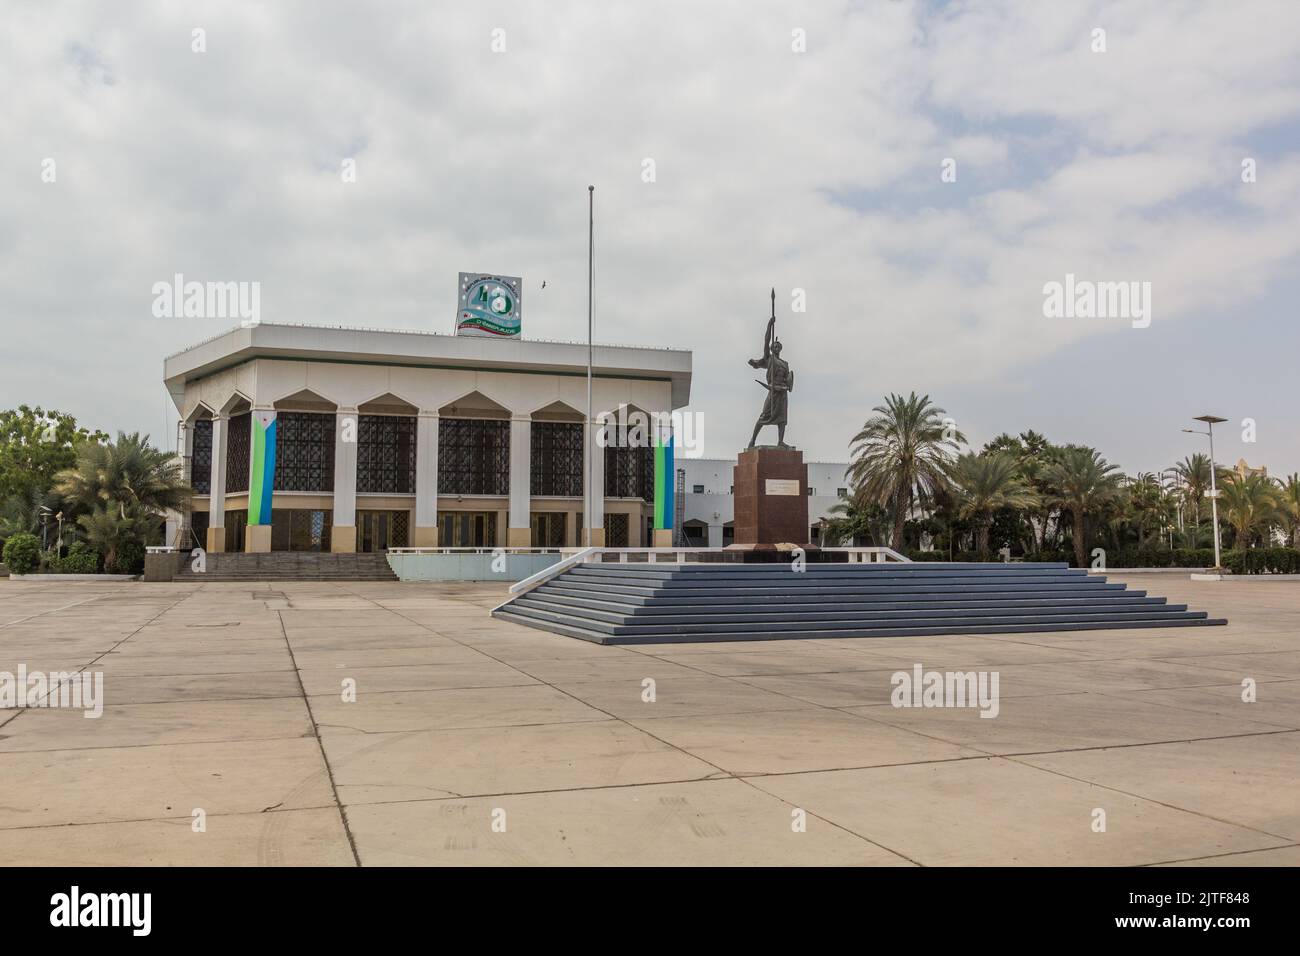 DJIBOUTI, DJIBOUTI - APRIL 18, 2019: Monument of Martyrs in front of the People's Palace (Palais du Peuple) in Djibouti, capital of Djibouti. Stock Photo